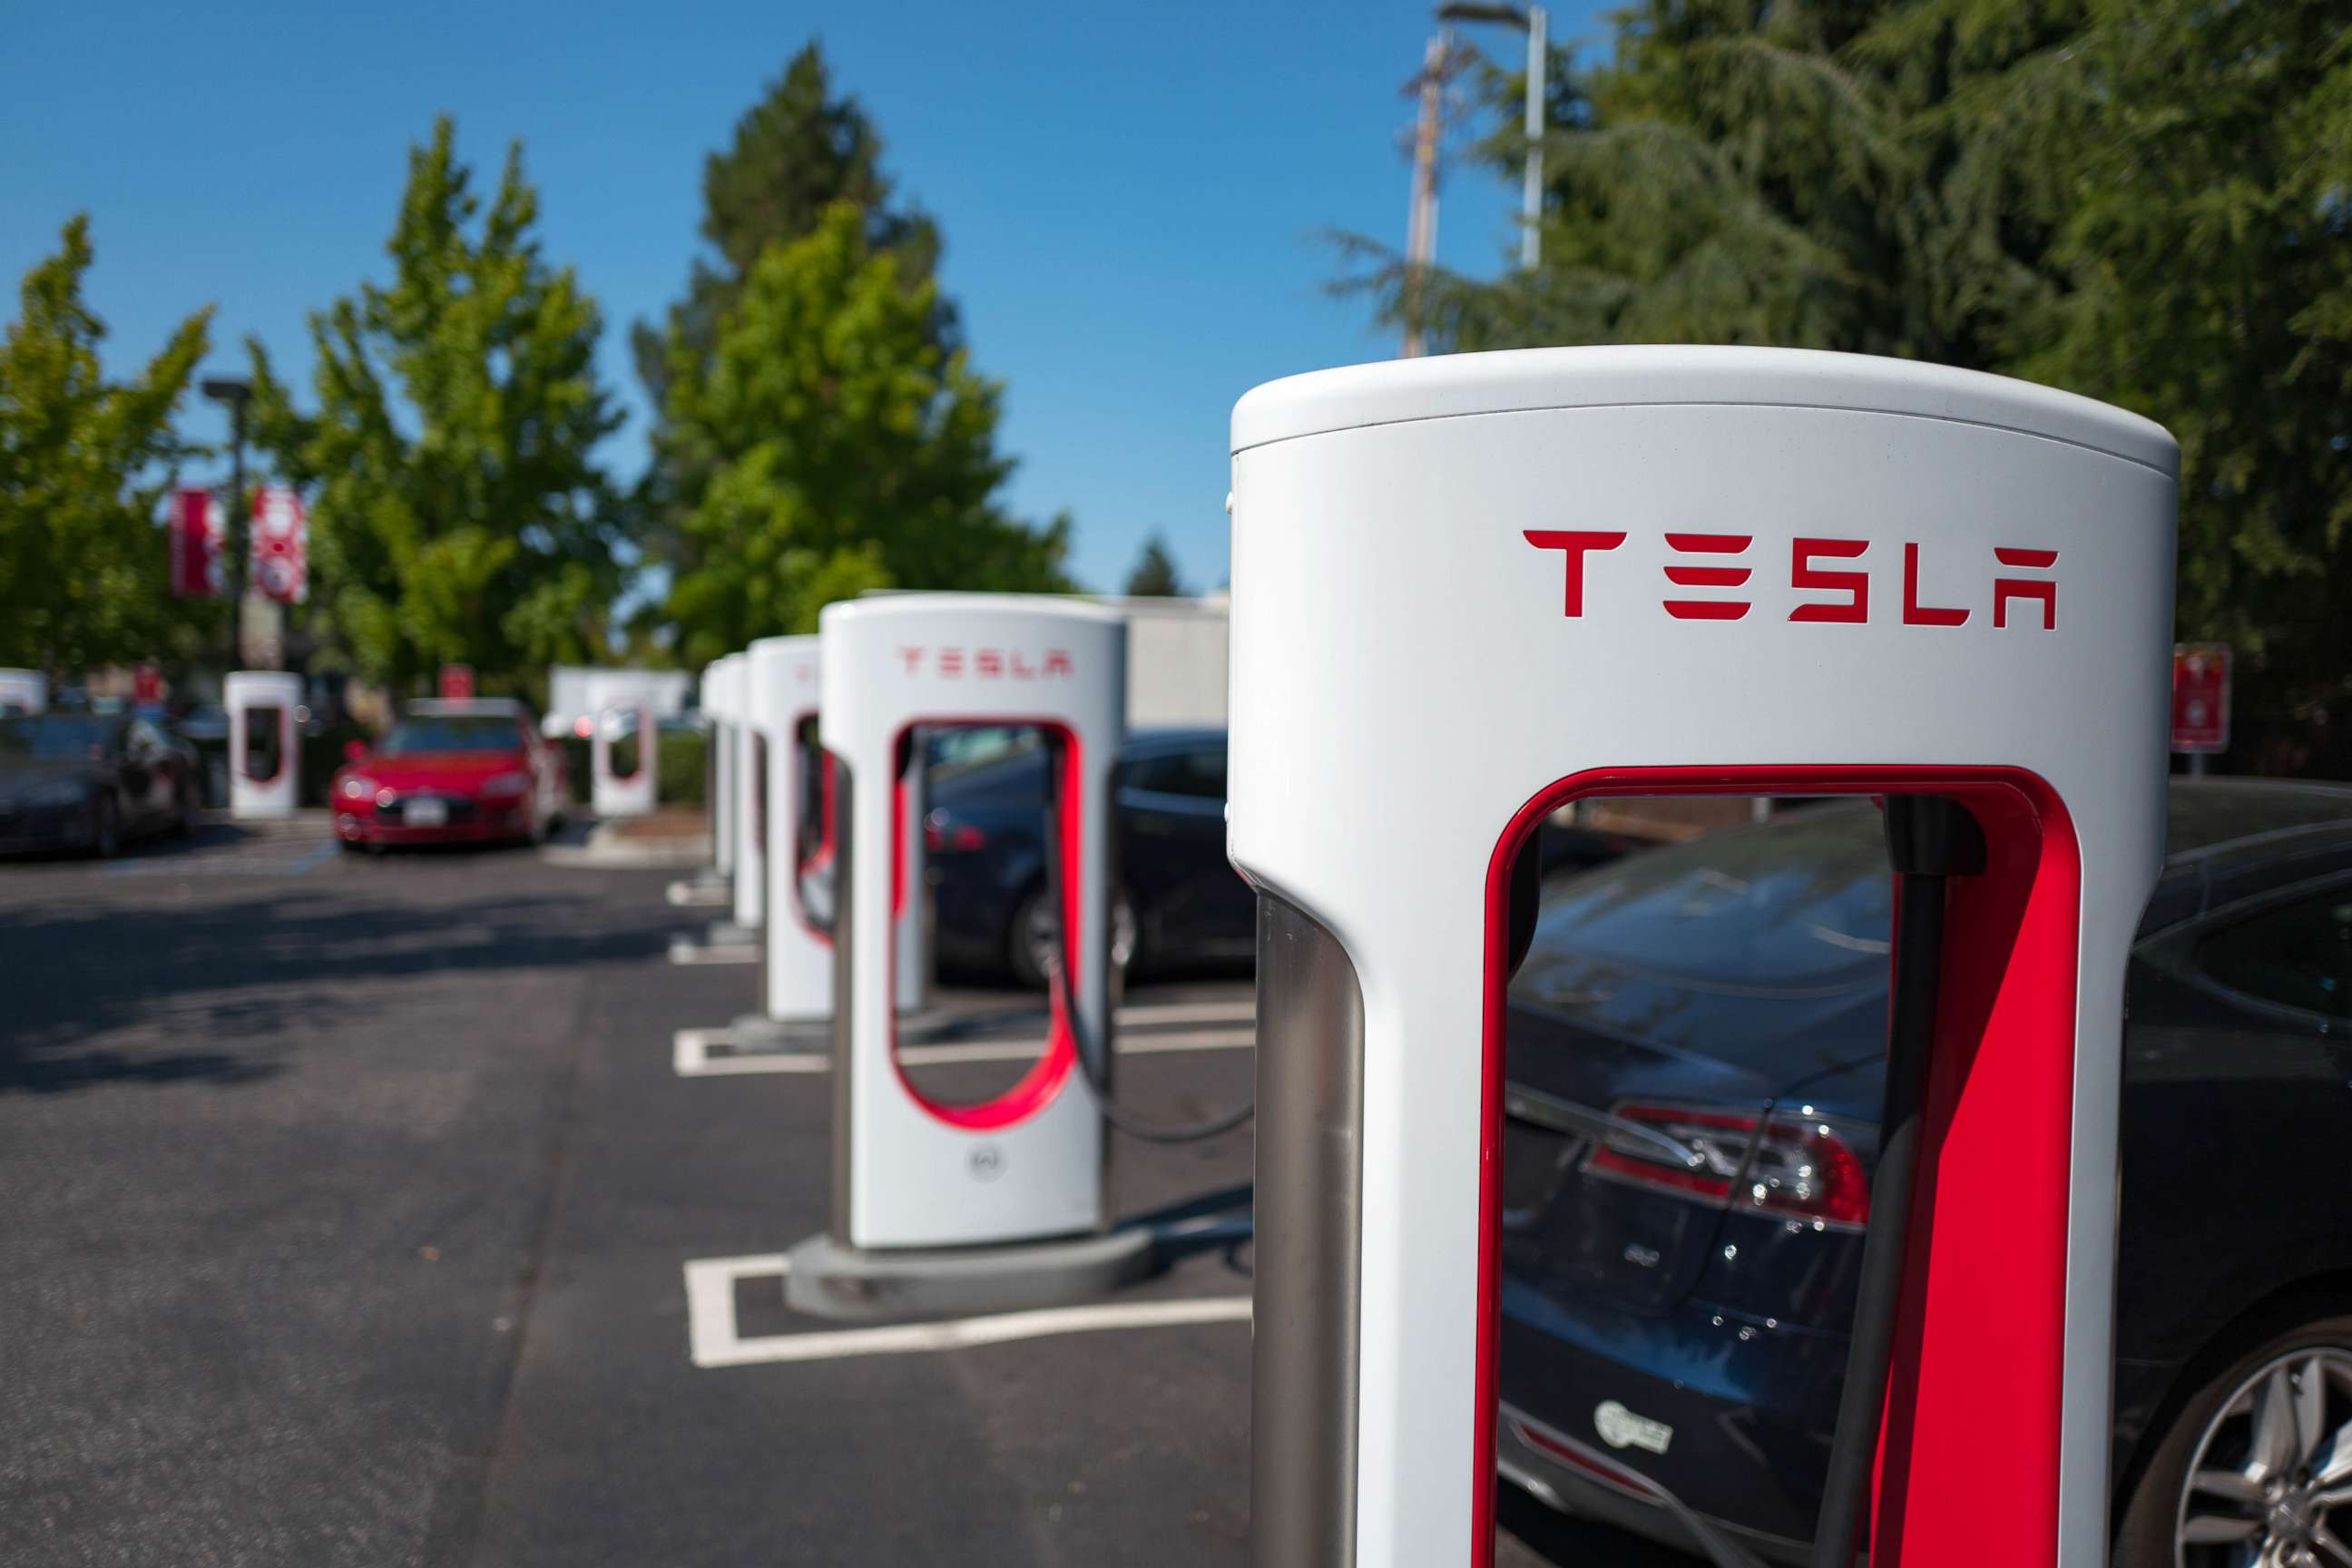 PHOTO: A Tesla supercharger rapid battery charging station in Mountain View, Calif., Aug. 24, 2016.